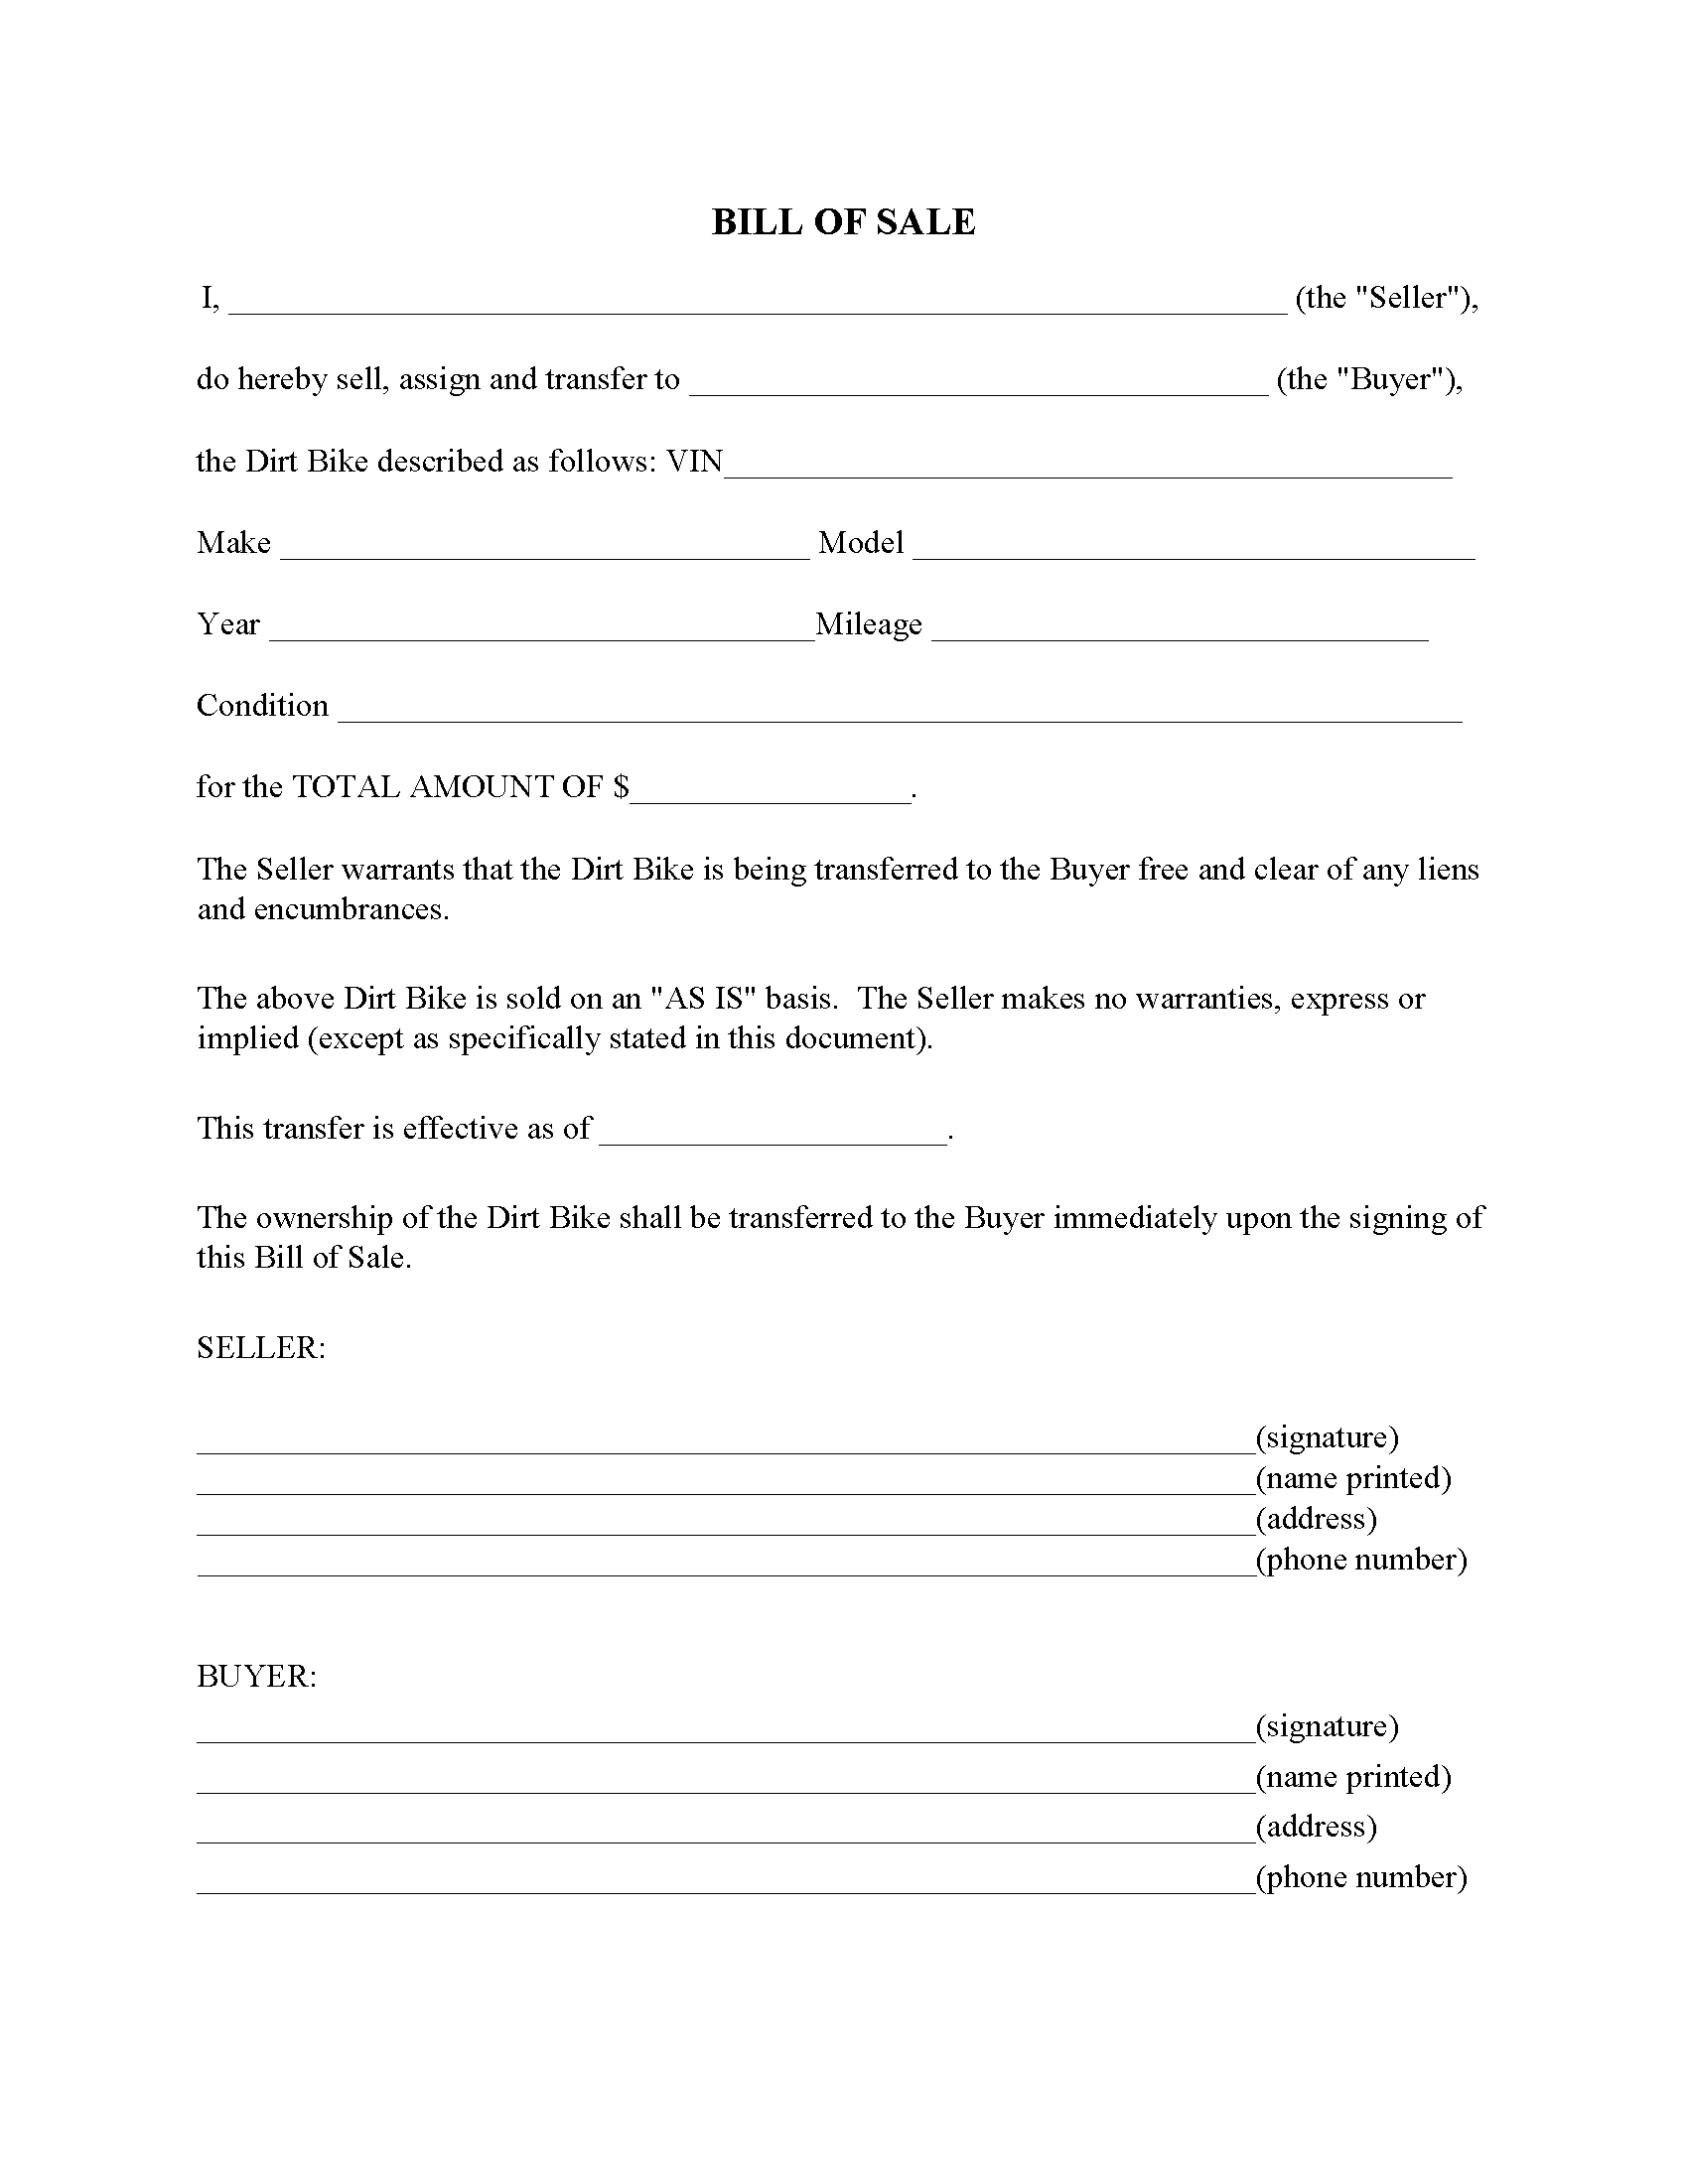 Dirt Bike Bill of Sale Form Fillable PDF Free Printable Legal Forms